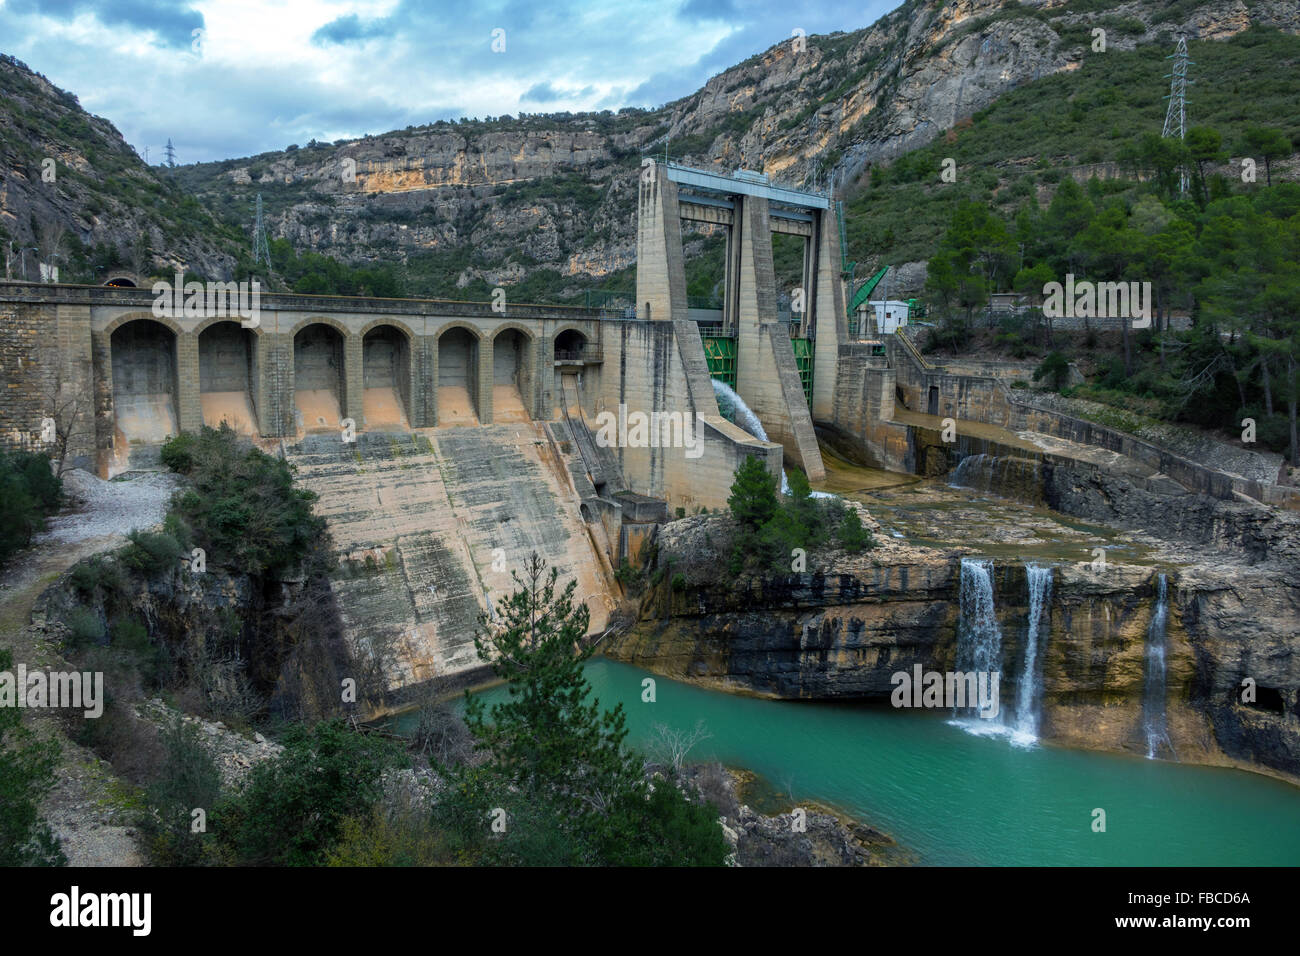 Spillway and dam across Noguera River, Terradets gorge, Catalunya, Spain Stock Photo